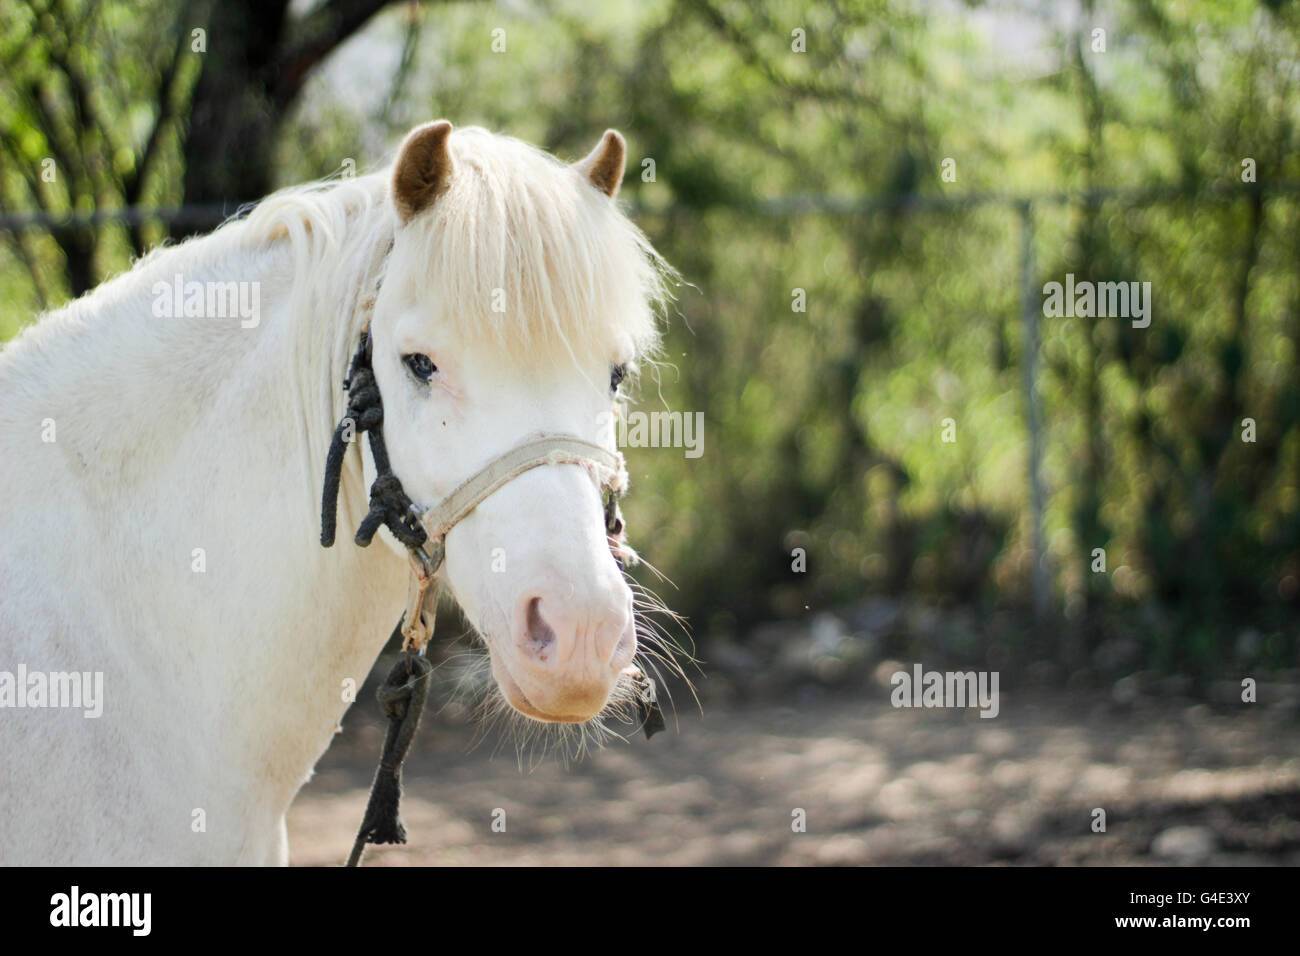 Photograph of a white horse Stock Photo